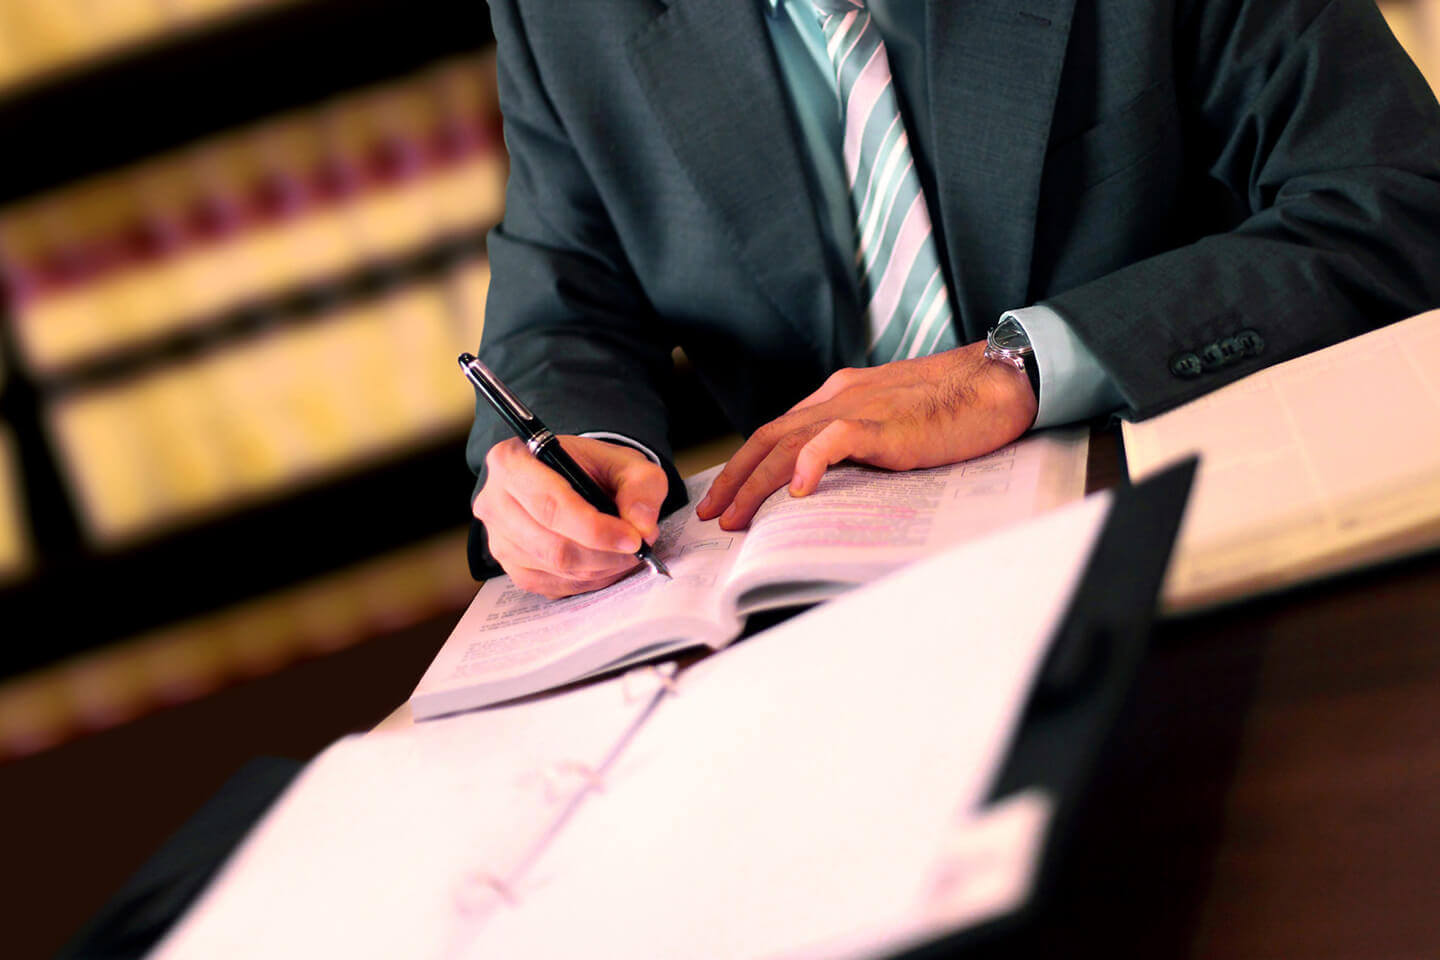 The Essential Law Firm’s Business Processes